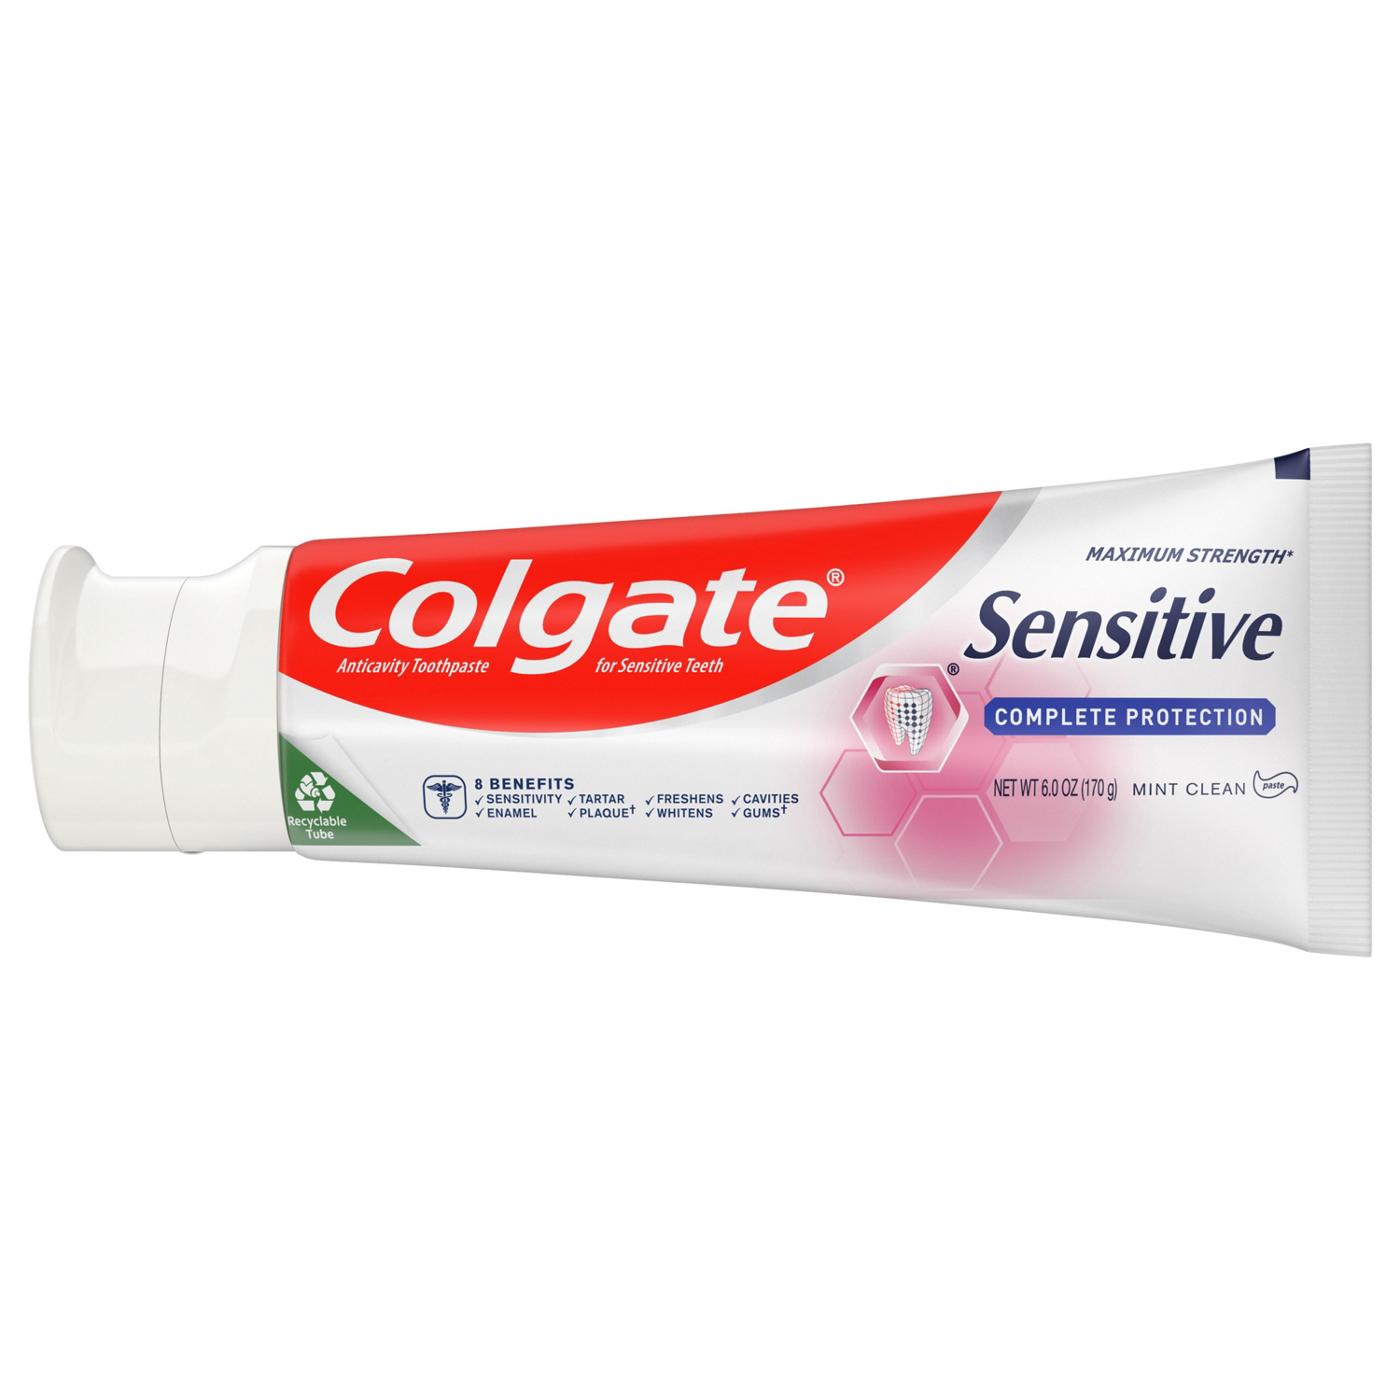 Colgate Sensitive Complete Protection Anticavity Toothpaste - Mint Clean; image 2 of 3